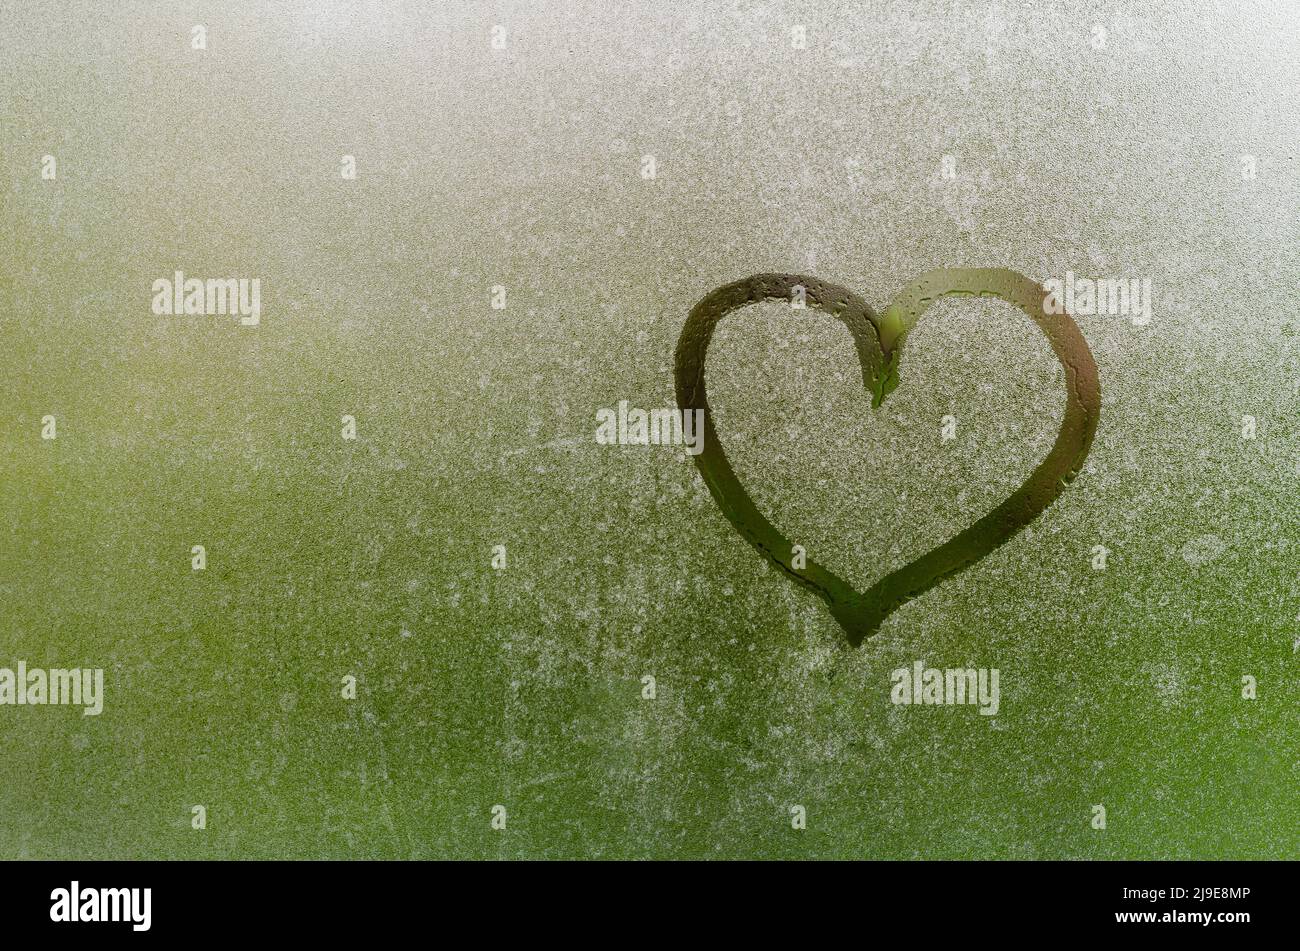 Heart painted on window which fogged up after rain with blurred green color background. Stock Photo